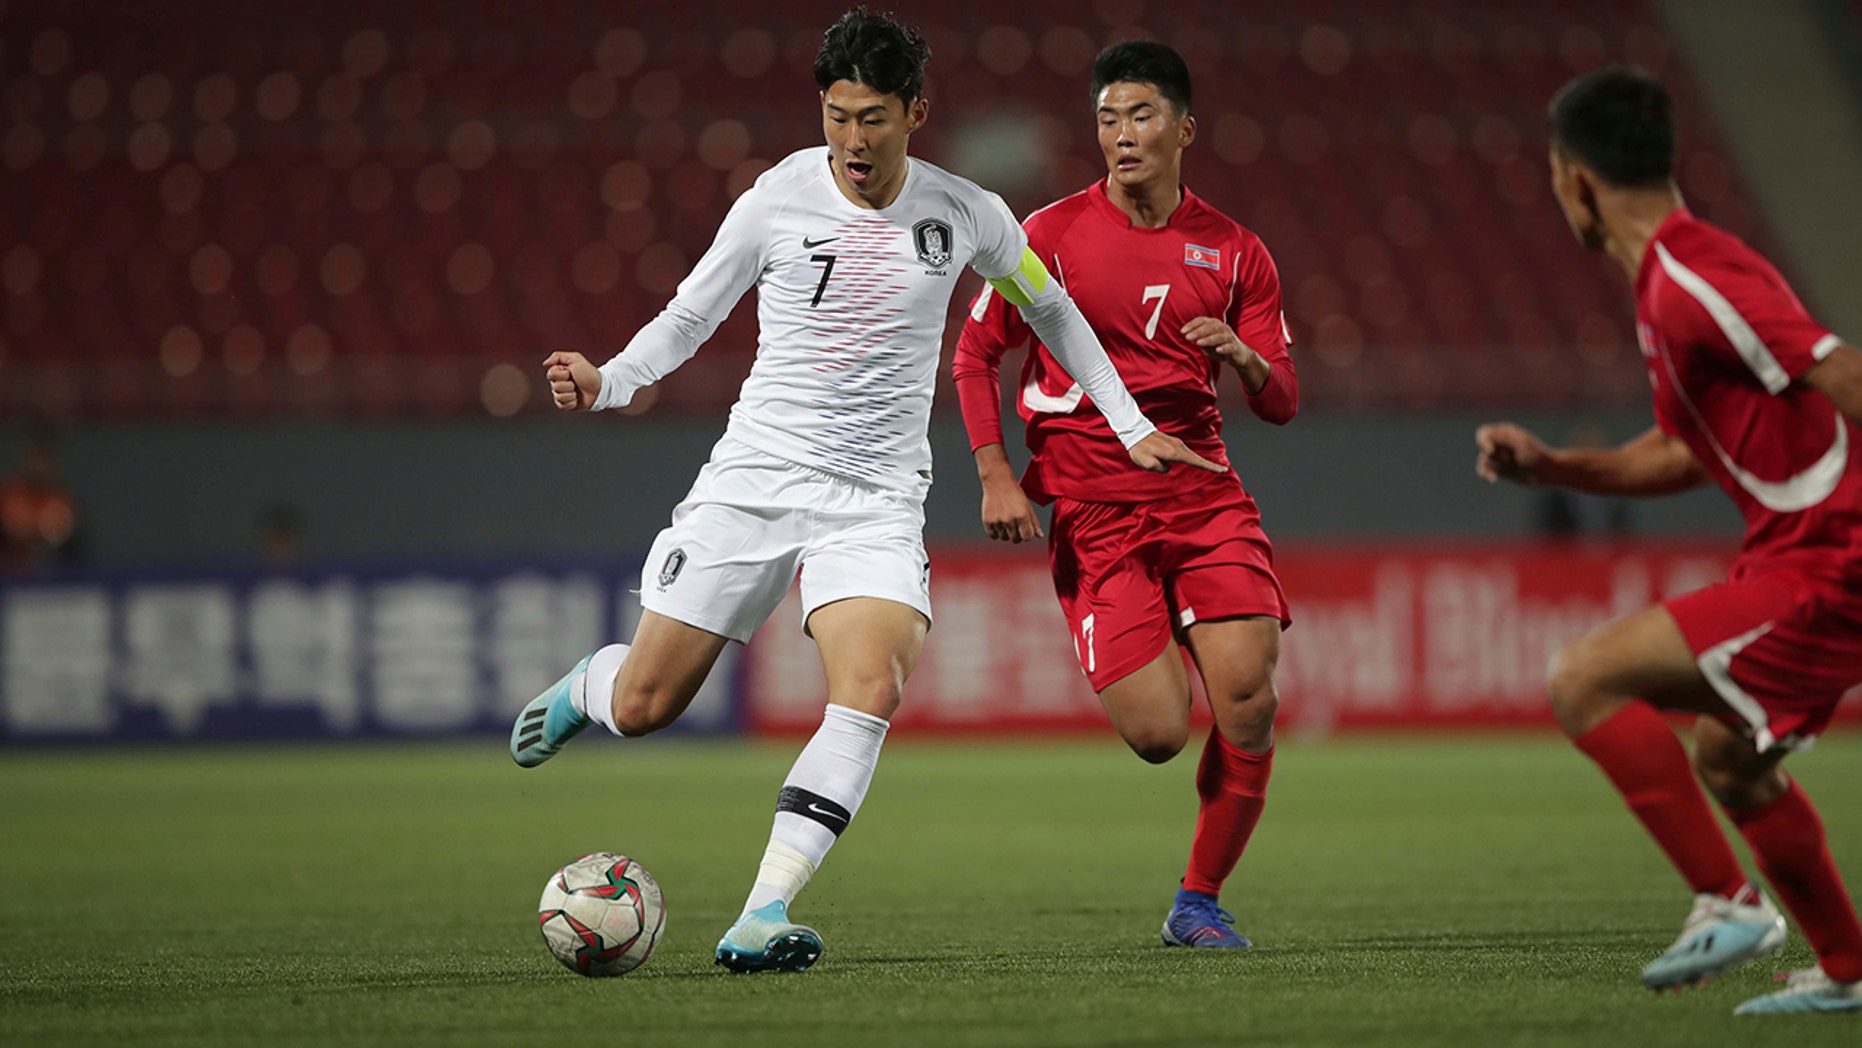 In this photo provided by the Korea Football Association, South Korea's Son Heung-min, left, fights for the ball against North Korea's Han Kwang Song during their Asian zone Group H qualifying soccer match for the 2022 World Cup at Kim Il Sung Stadium in Pyongyang, North Korea, Tuesday, Oct. 15, 2019. (The Korea Football Association via AP).